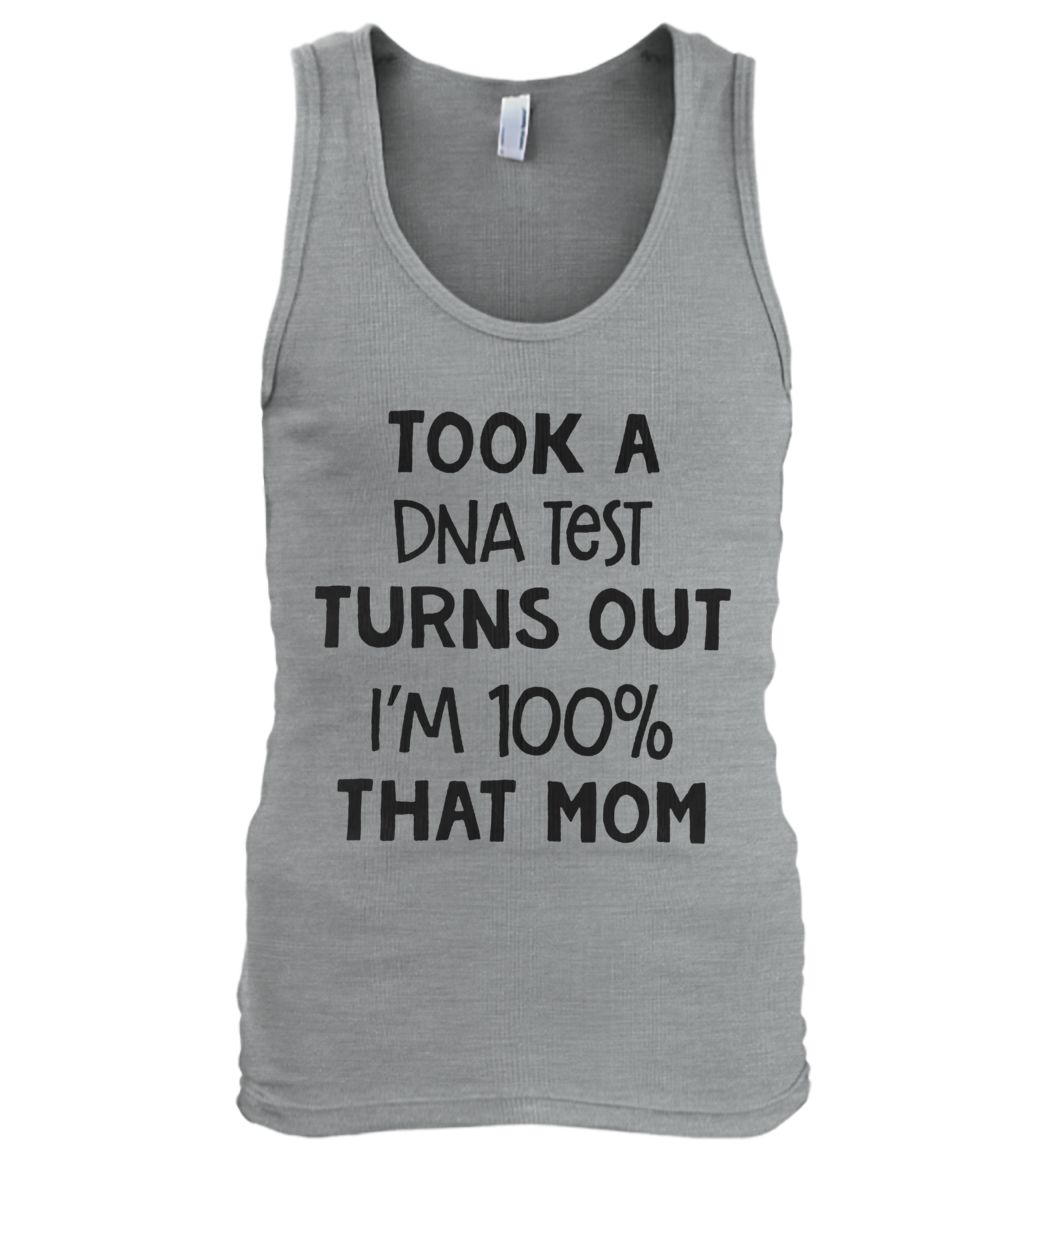 Took a dna test turns out I'm 100% that mom men's tank top